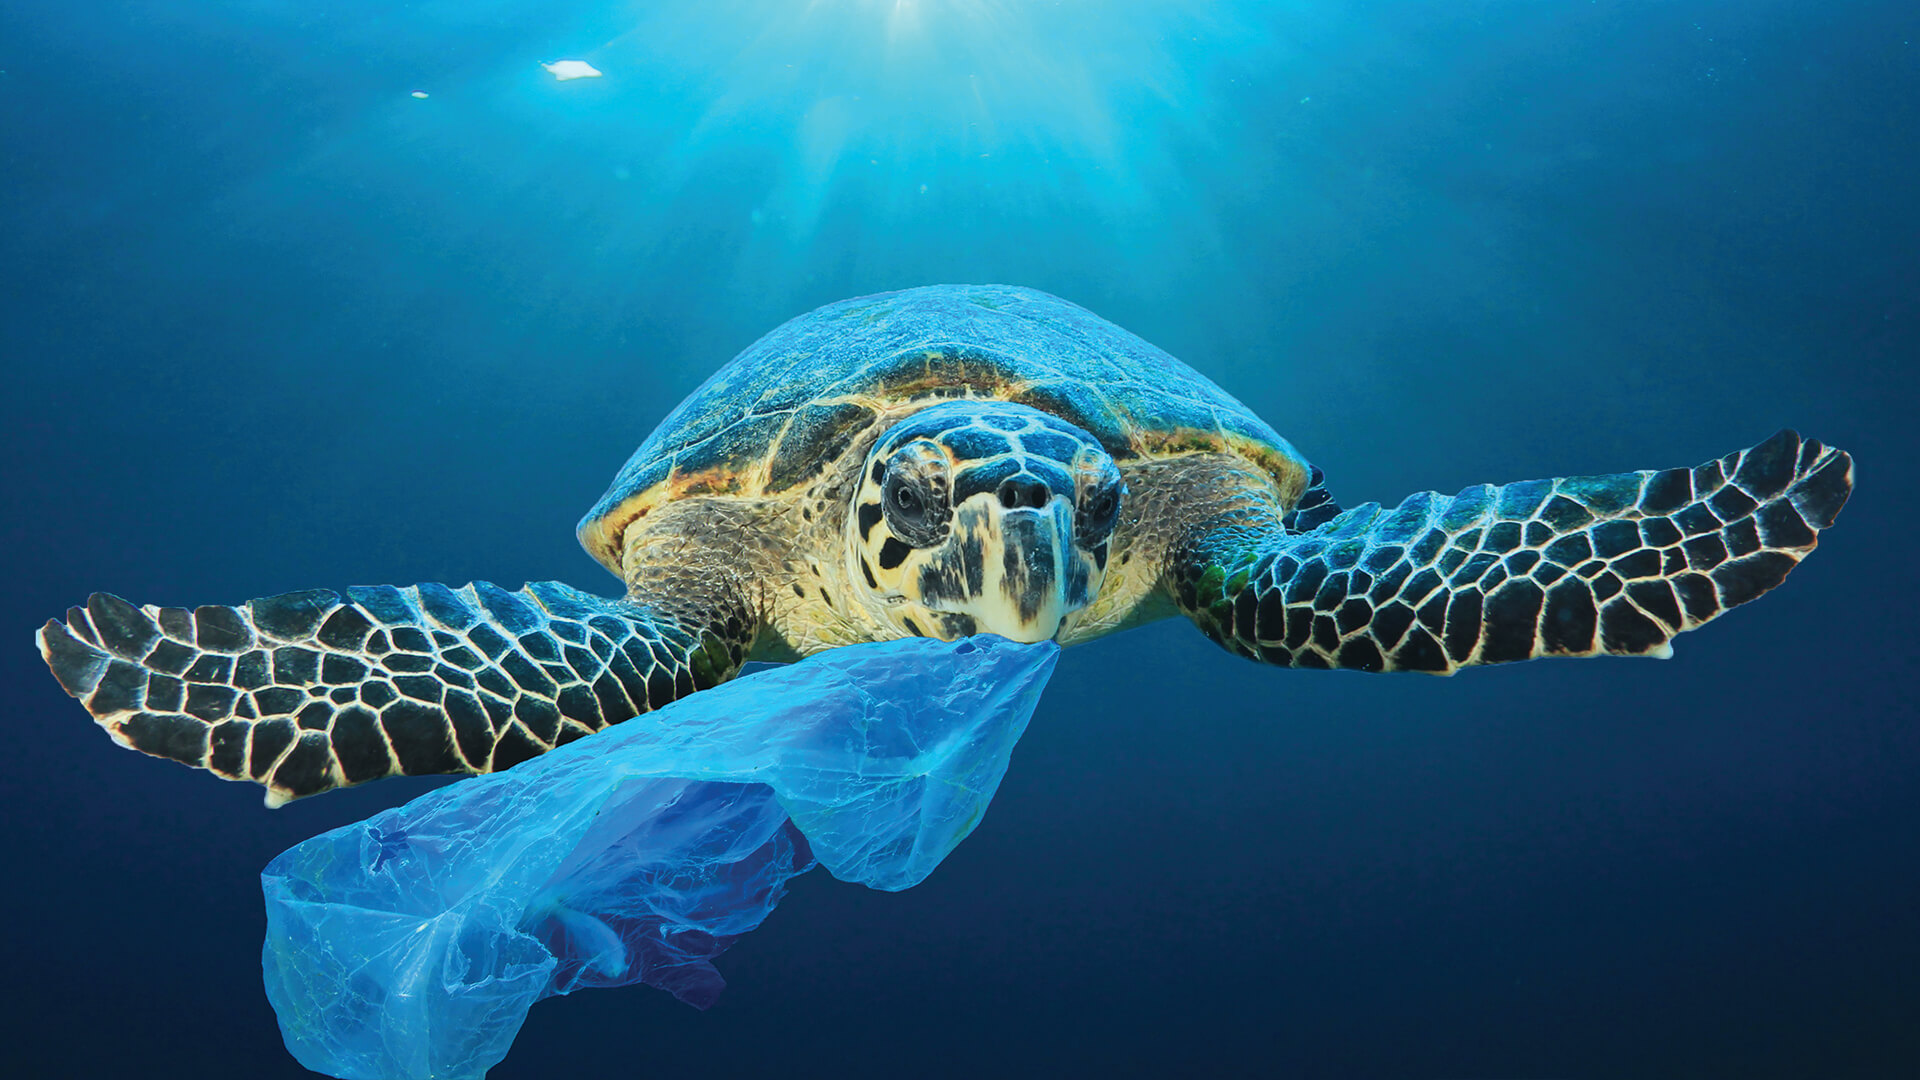 We are environmentally friendly and the image shows the effects of plastic waste on wildlife